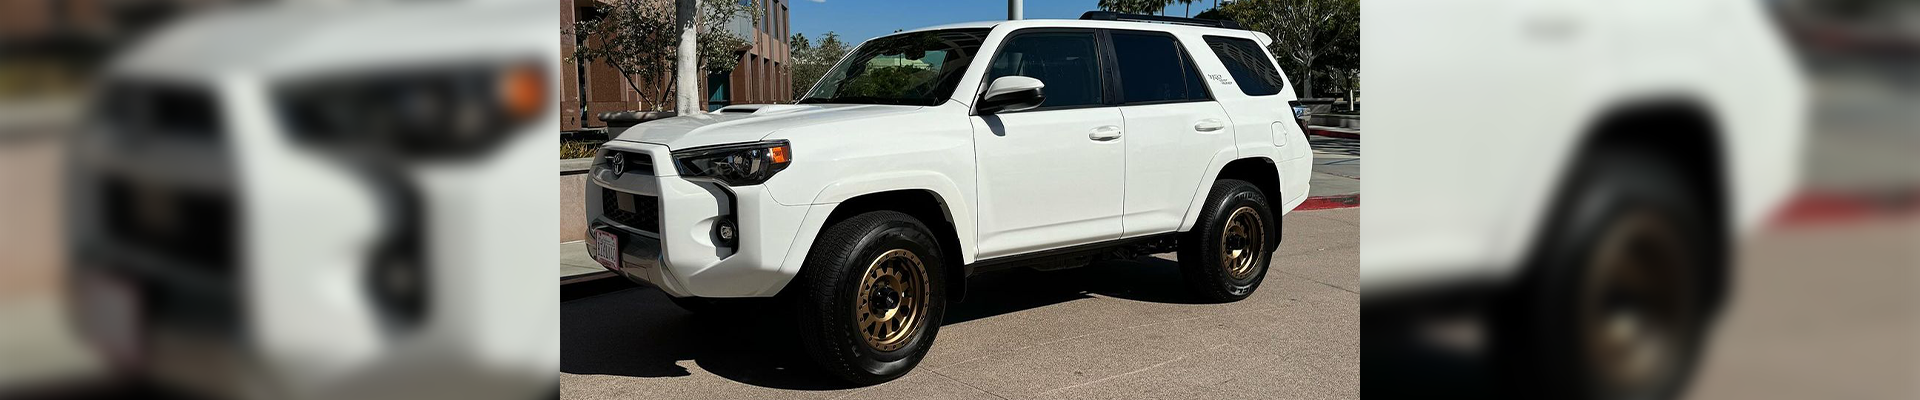 toyota-4Runner-gallery-image.png